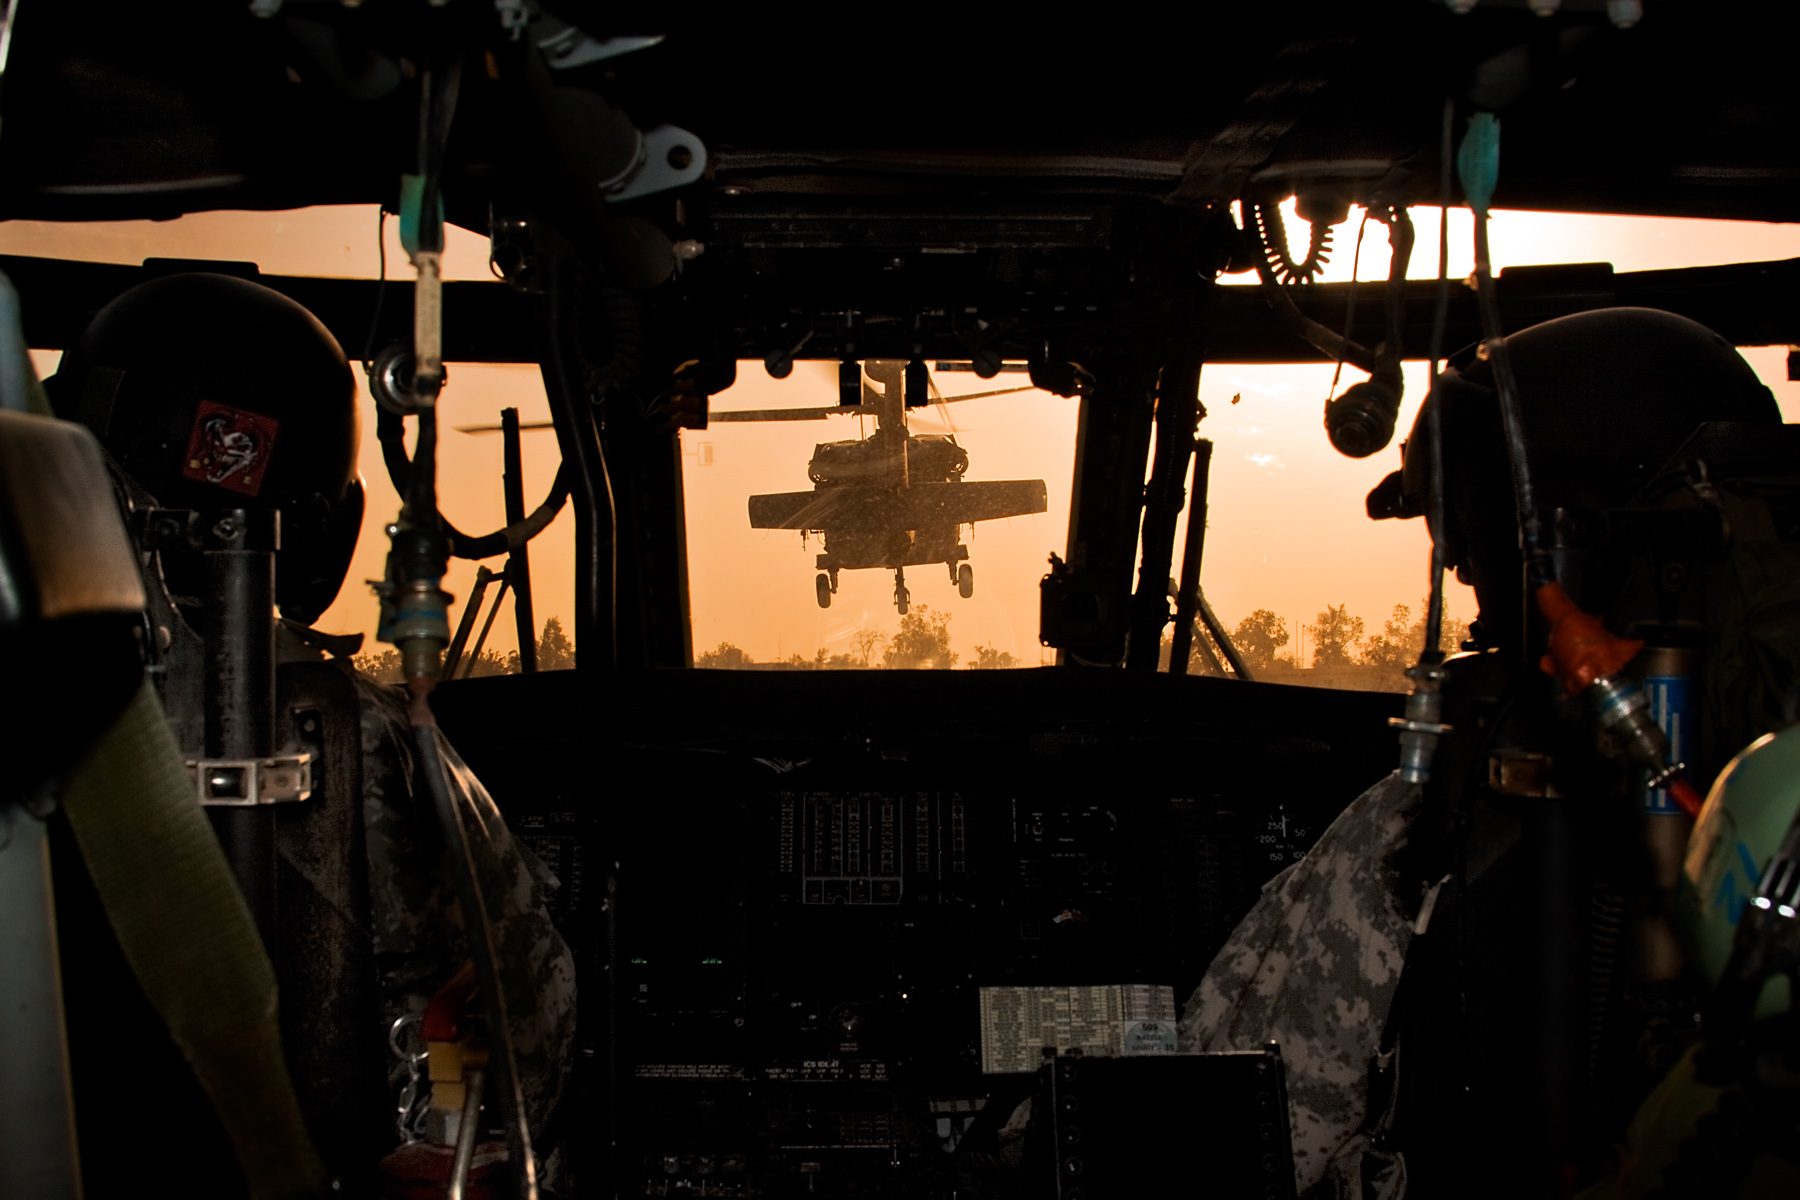 cockpit, Helicopter, Pilot, Soldiers, Military Wallpaper